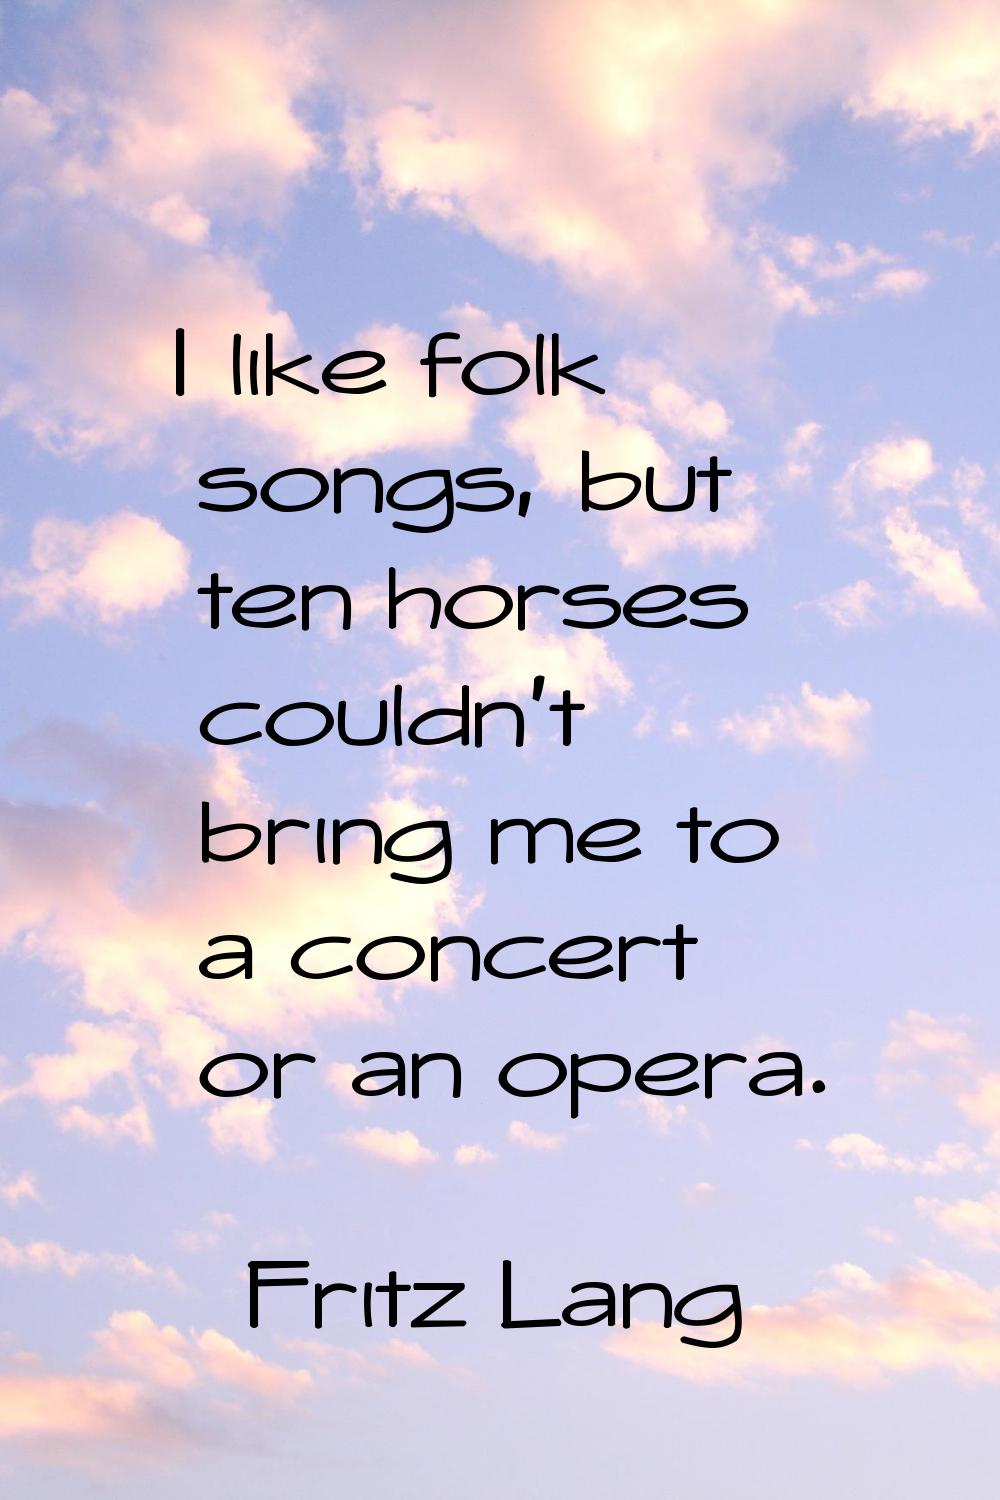 I like folk songs, but ten horses couldn't bring me to a concert or an opera.